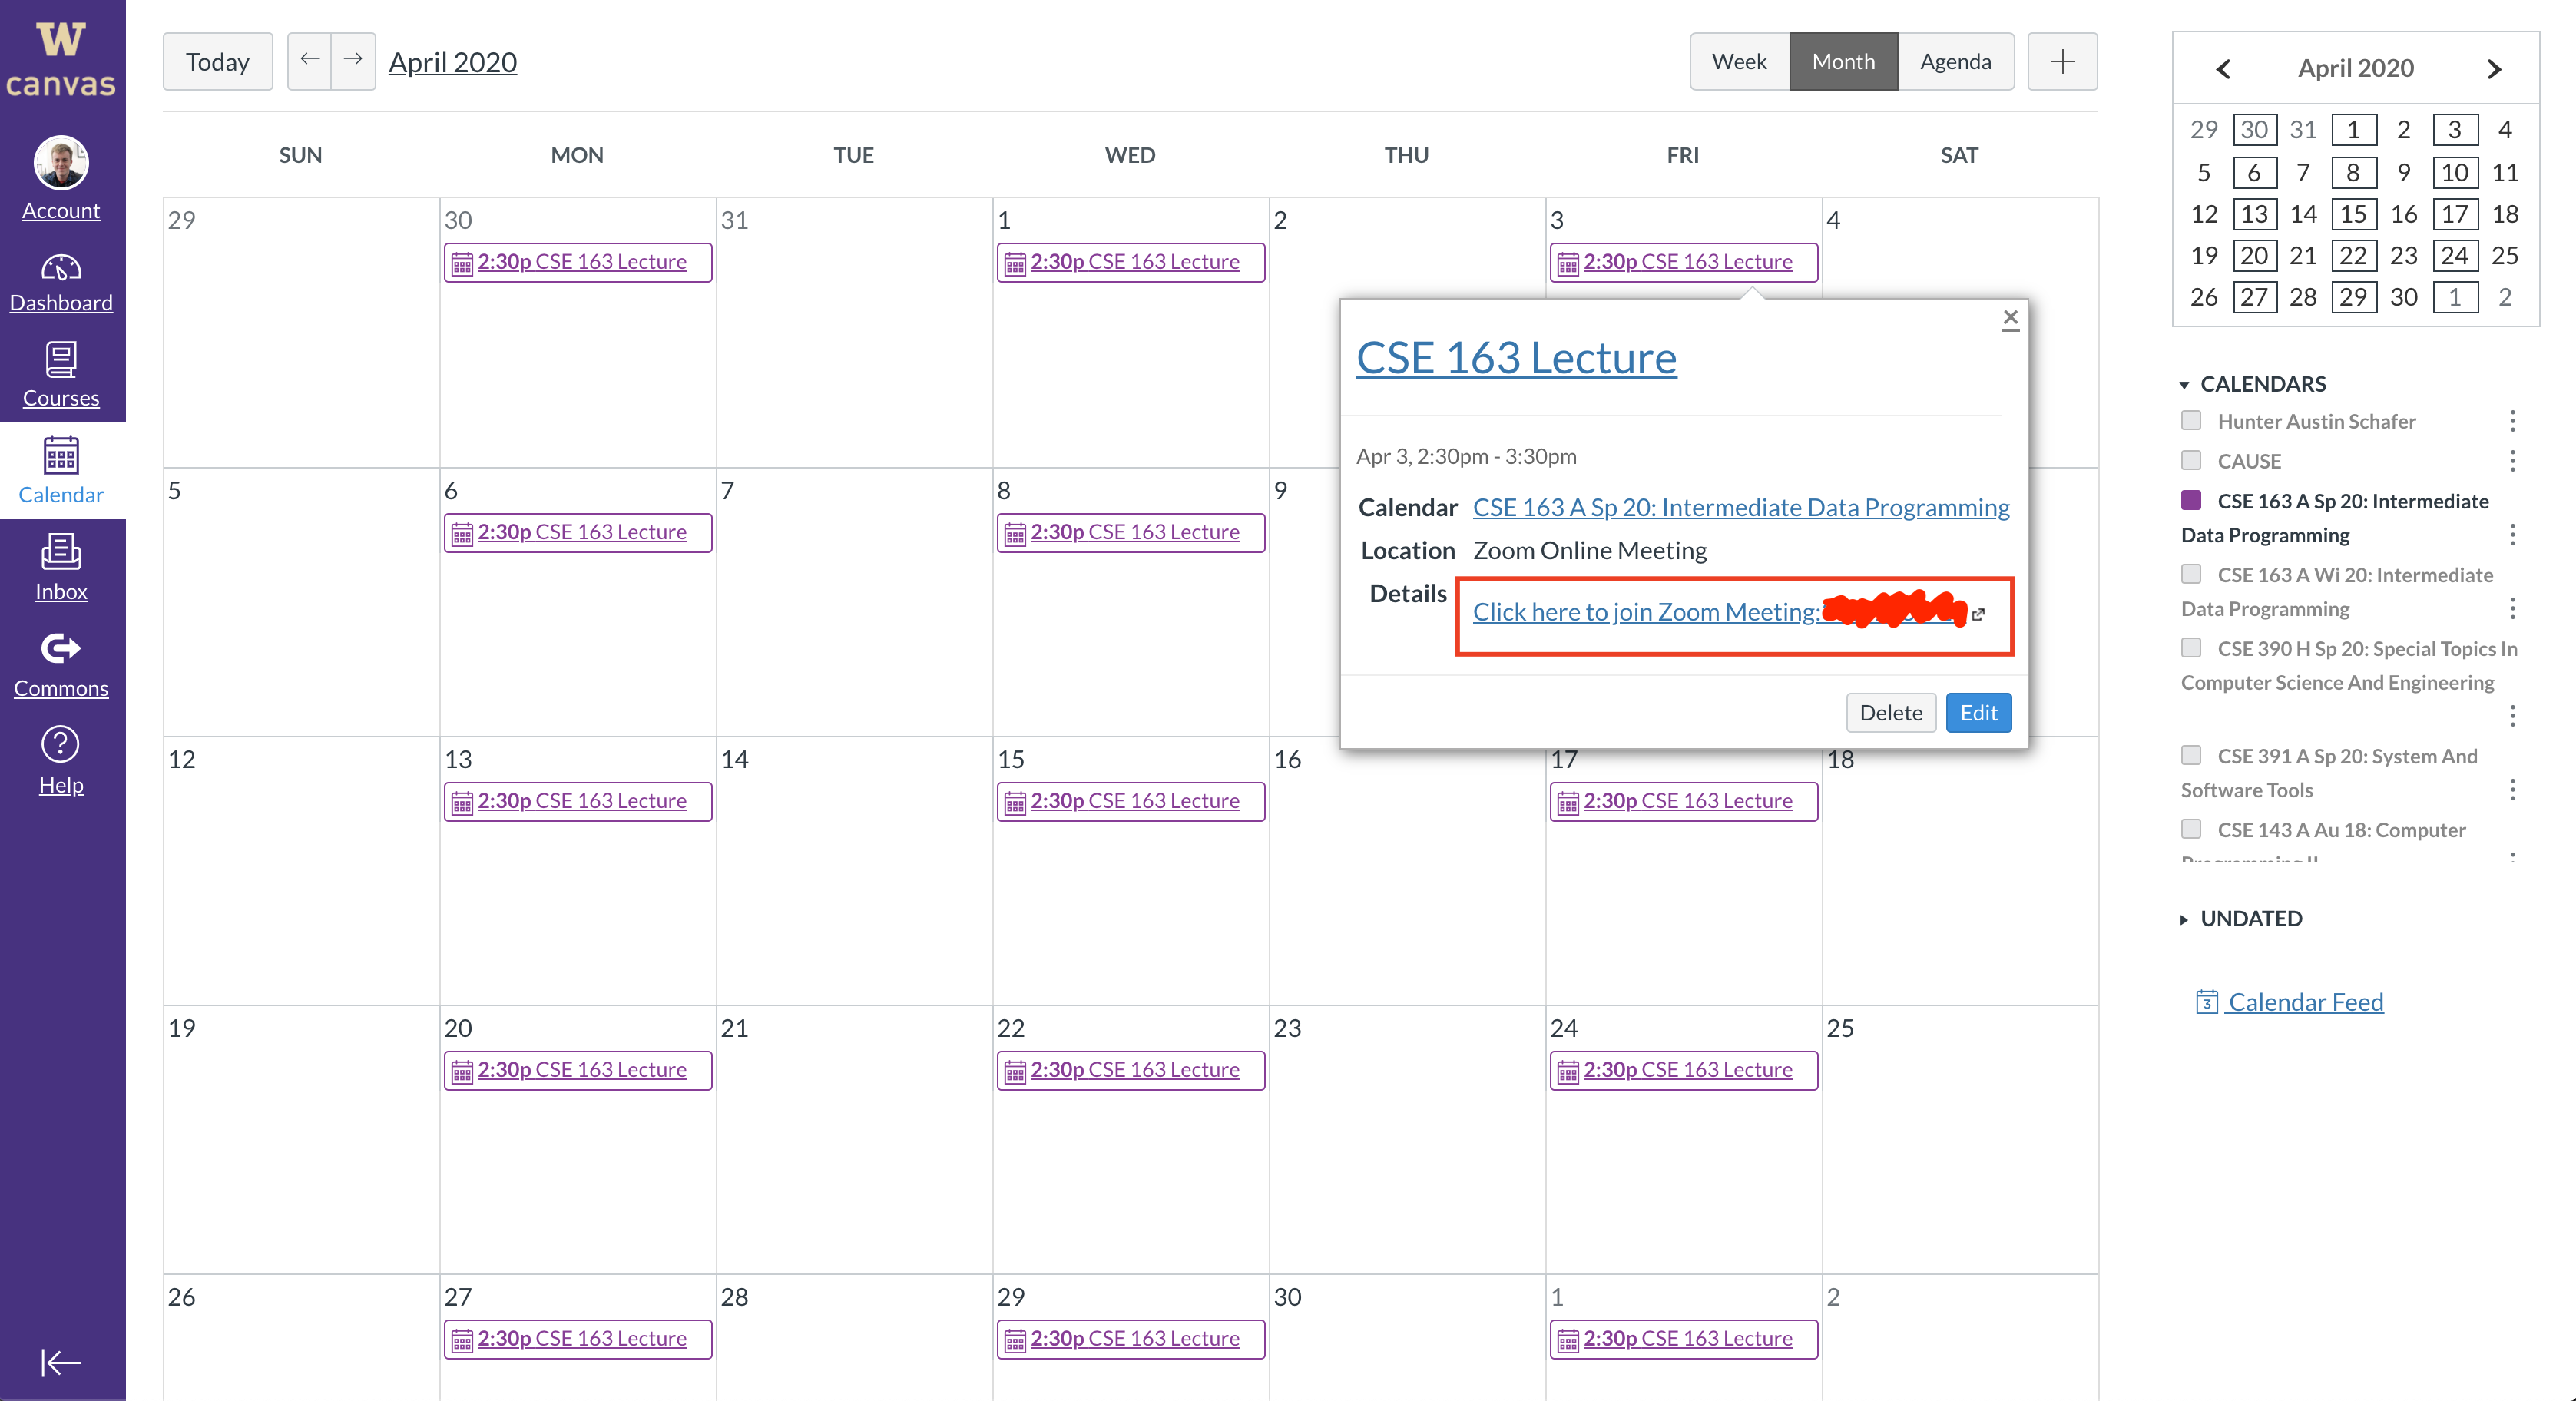 Clicking on the 'Join' link for a Zoom event in Canvas calendar